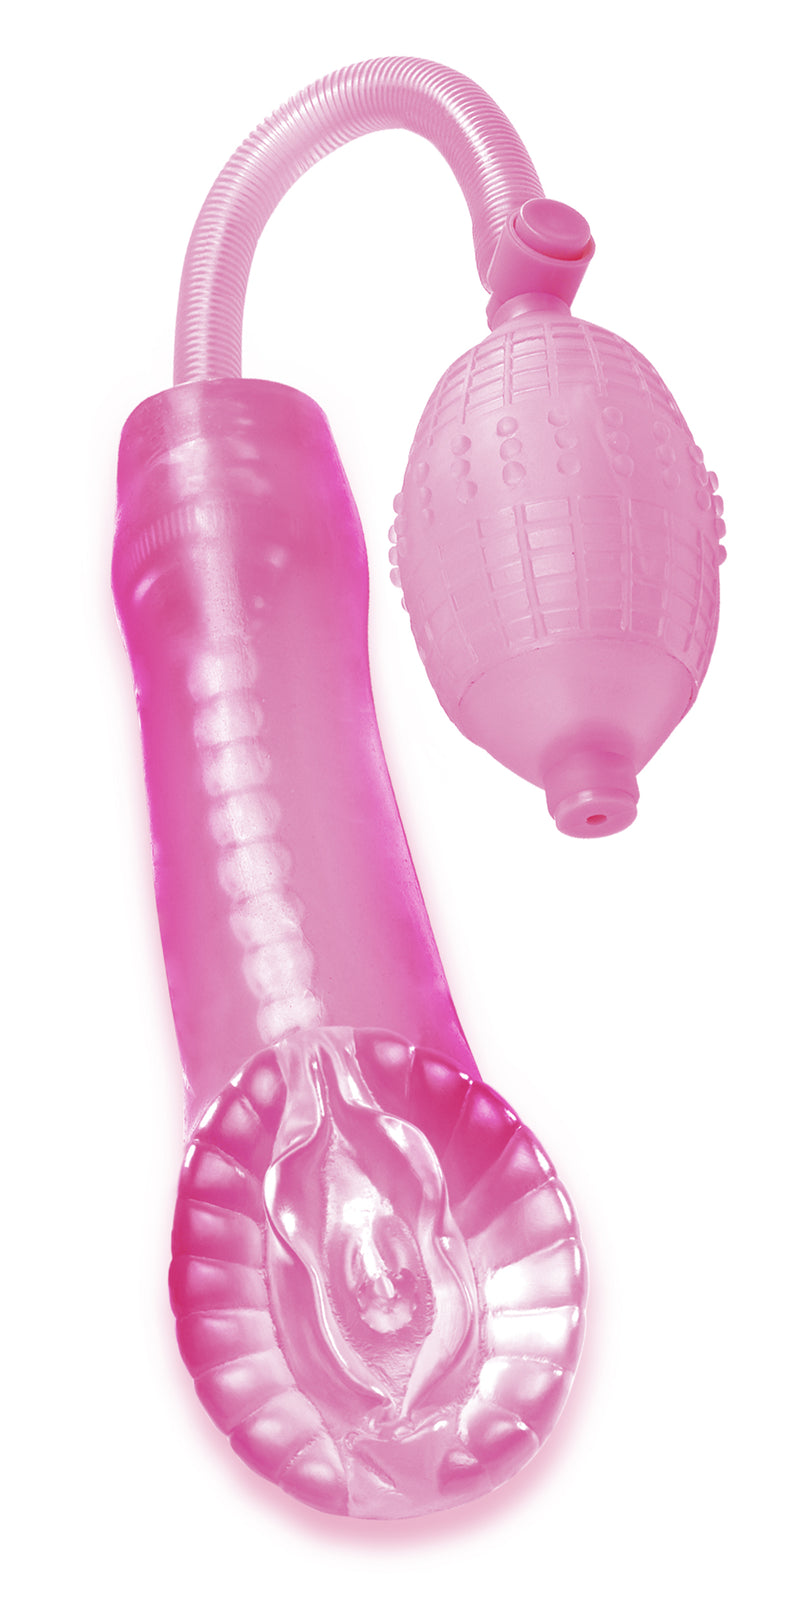 Power Up Your Performance with the Pussy Pump Toy - Feel Bigger, Harder, and More Satisfied!